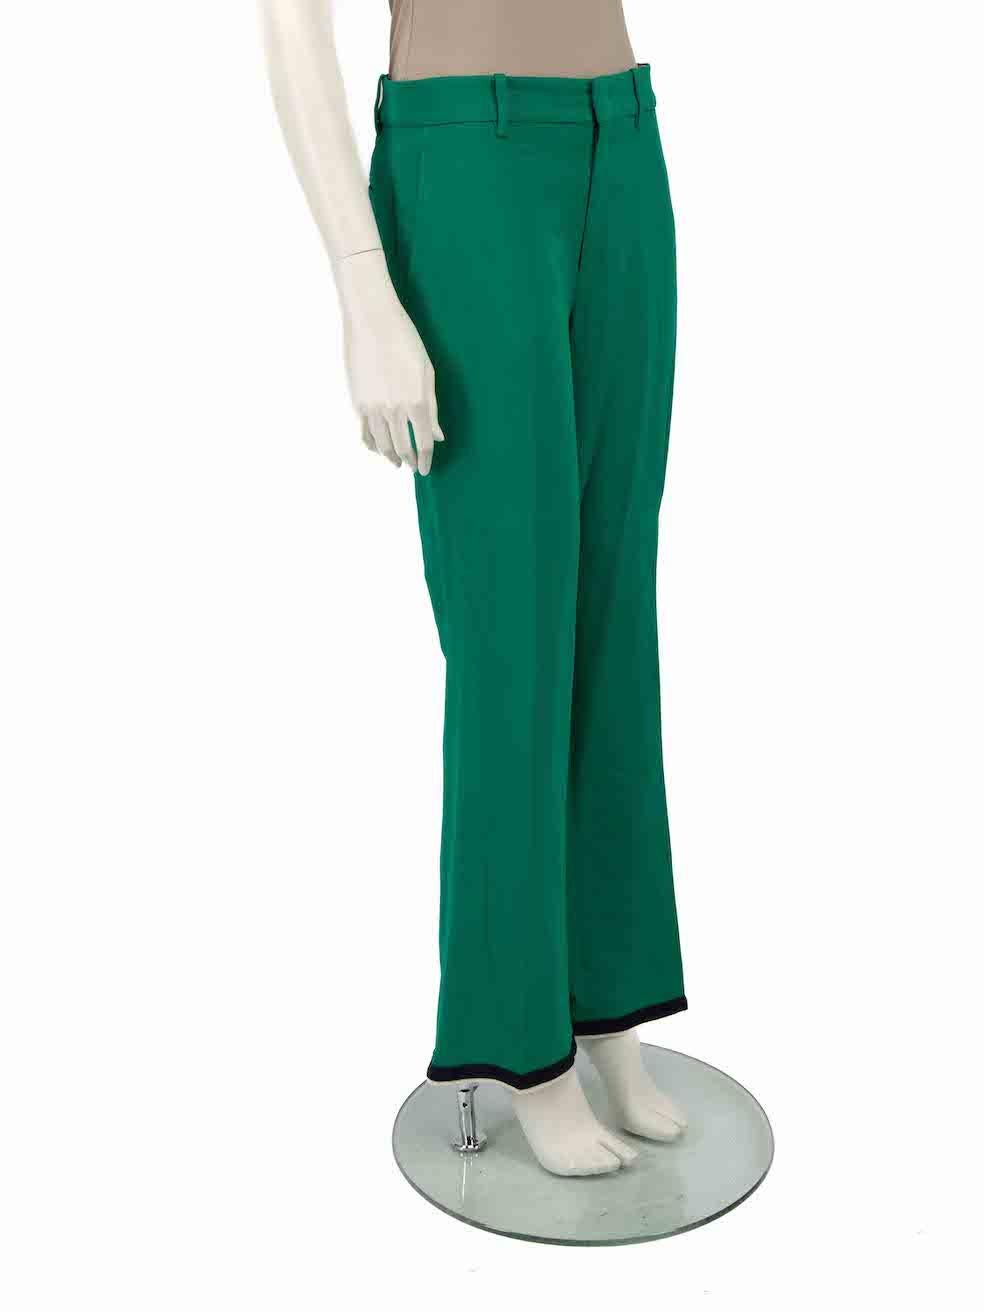 CONDITION is Good. Minor wear to trousers is evident. There are some plucks to the weave on this used Gucci designer resale item.
 
 
 
 Details
 
 
 Green
 
 Viscose
 
 Trousers
 
 Straight leg
 
 Mid rise
 
 Tape cuff detail
 
 2x Side pockets
 
